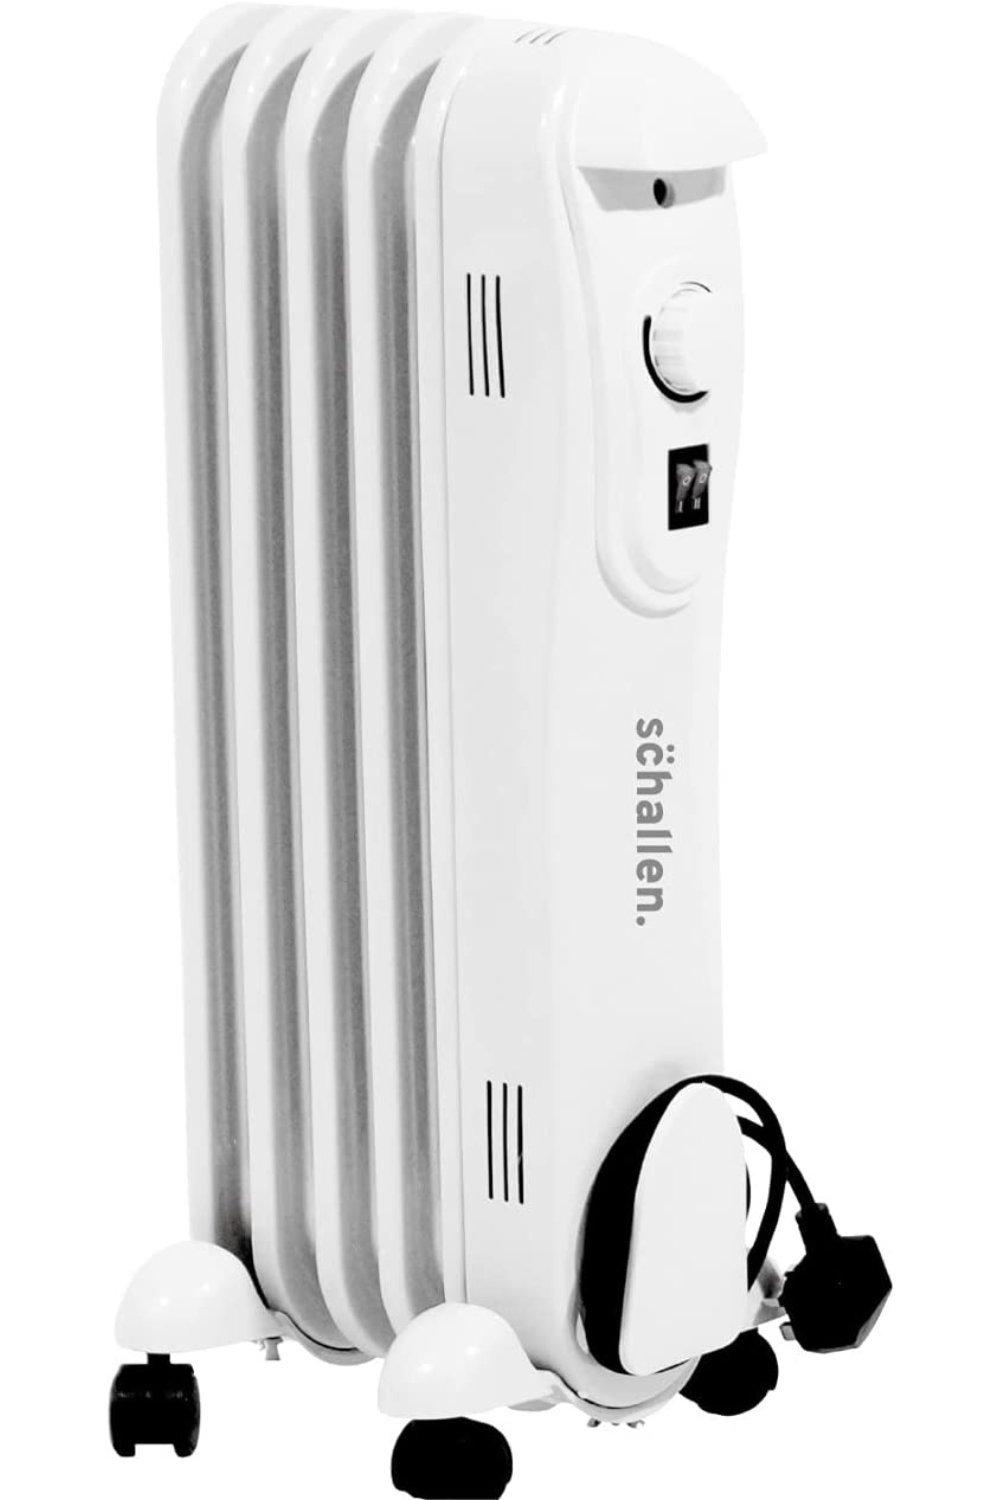 White Portable Electric Slim Oil Filled Radiator Heater with Adjustable Temperature Thermostat, 3 Heat Settings & Safety Cut Off (1000W - 5 Fin)